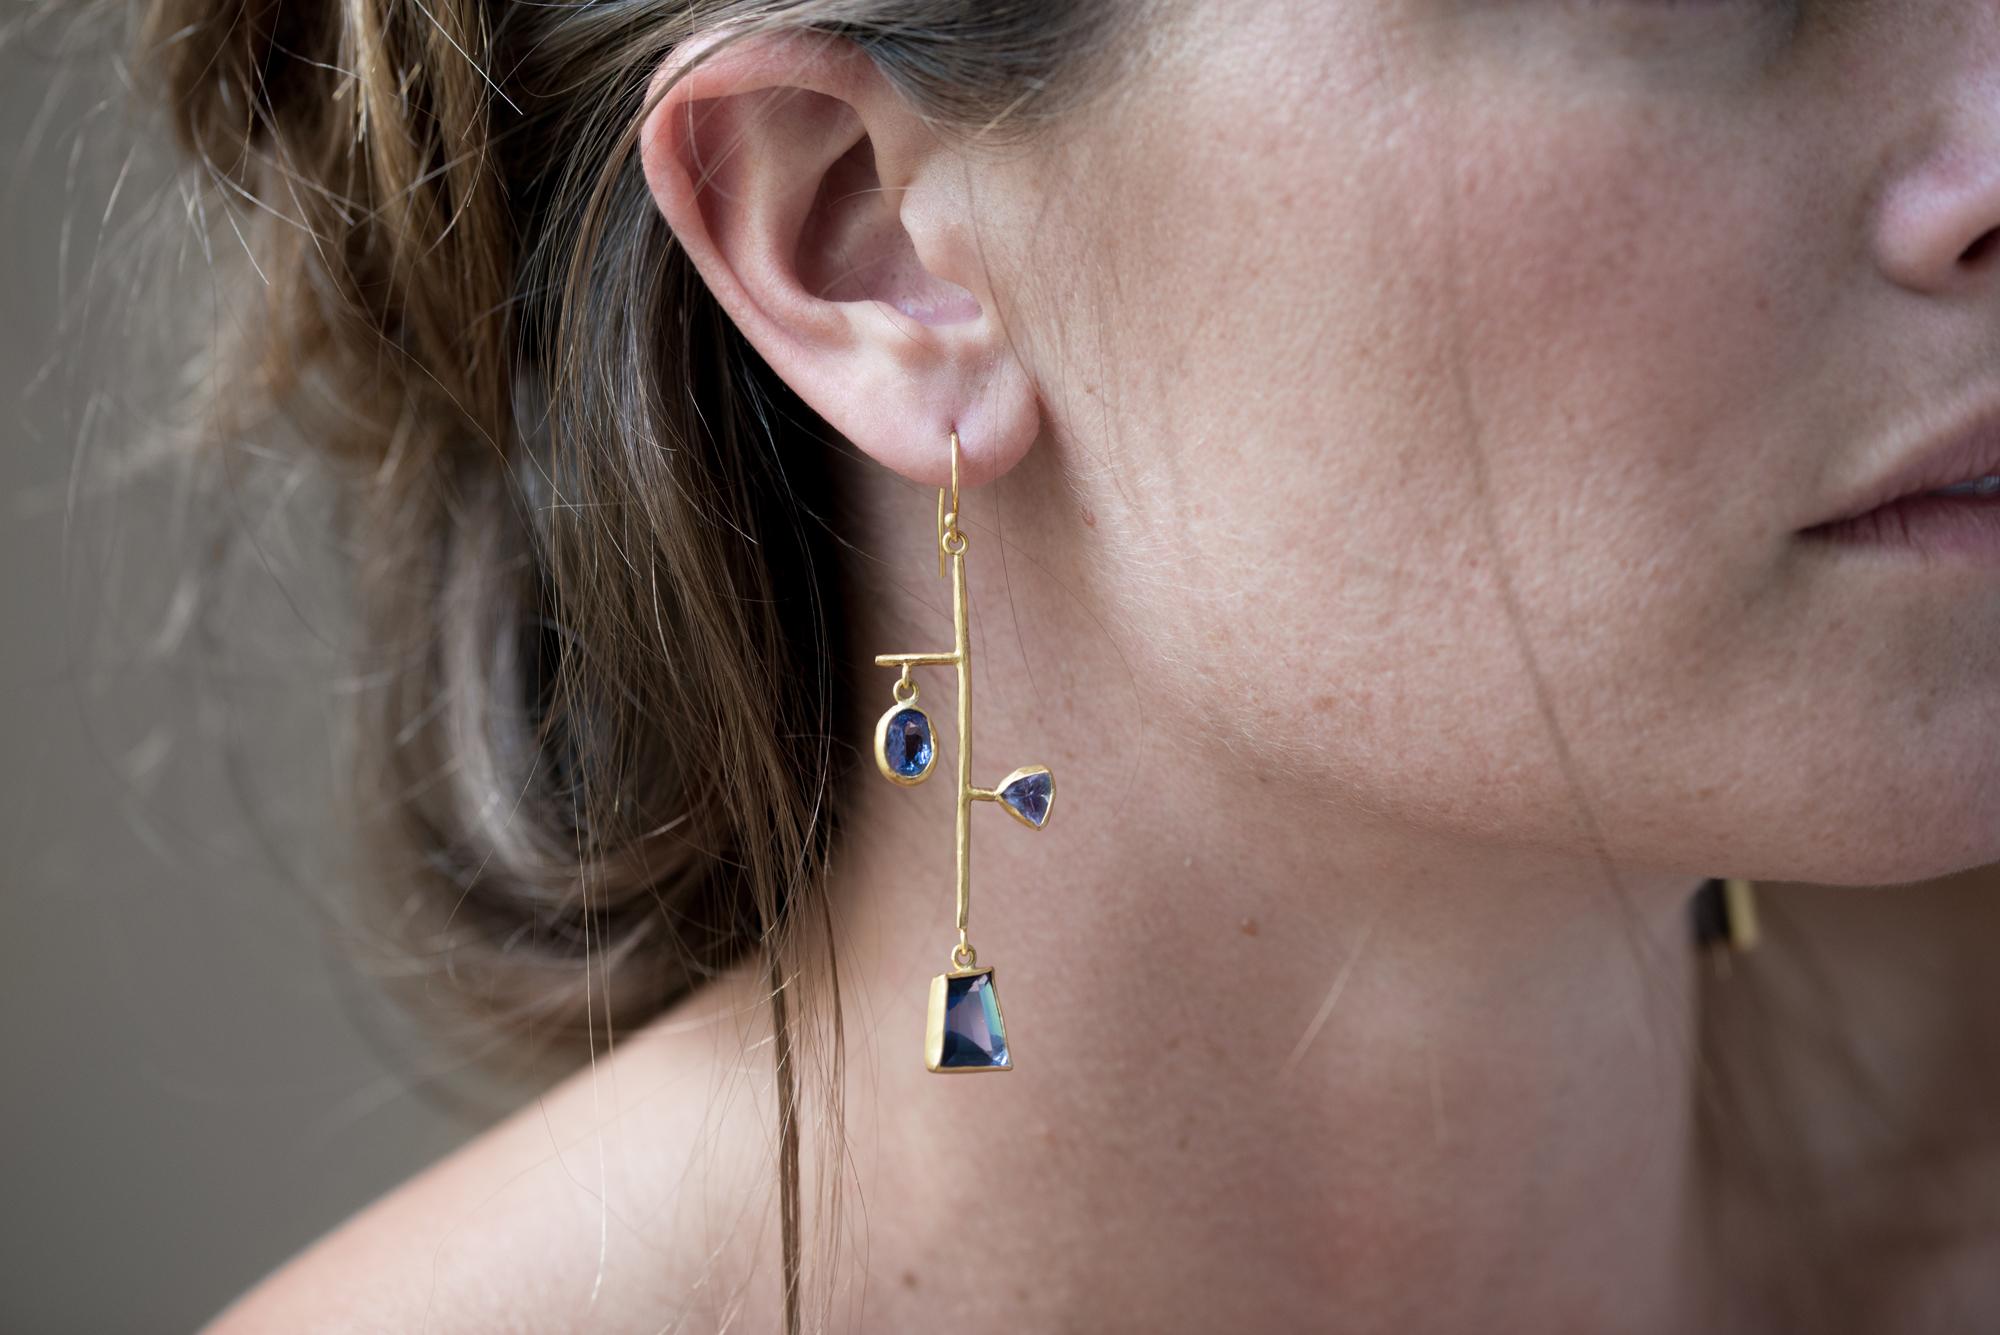 One of a kind, faceted, deep, periwinkle blue tanzanite mobile earrings are completely hand crafted of 22k gold with bezel set tanzanite. 18k Gold ear wires for pierced ears. Inspired by mid century design, this pair is truly, art to wear.

11.04